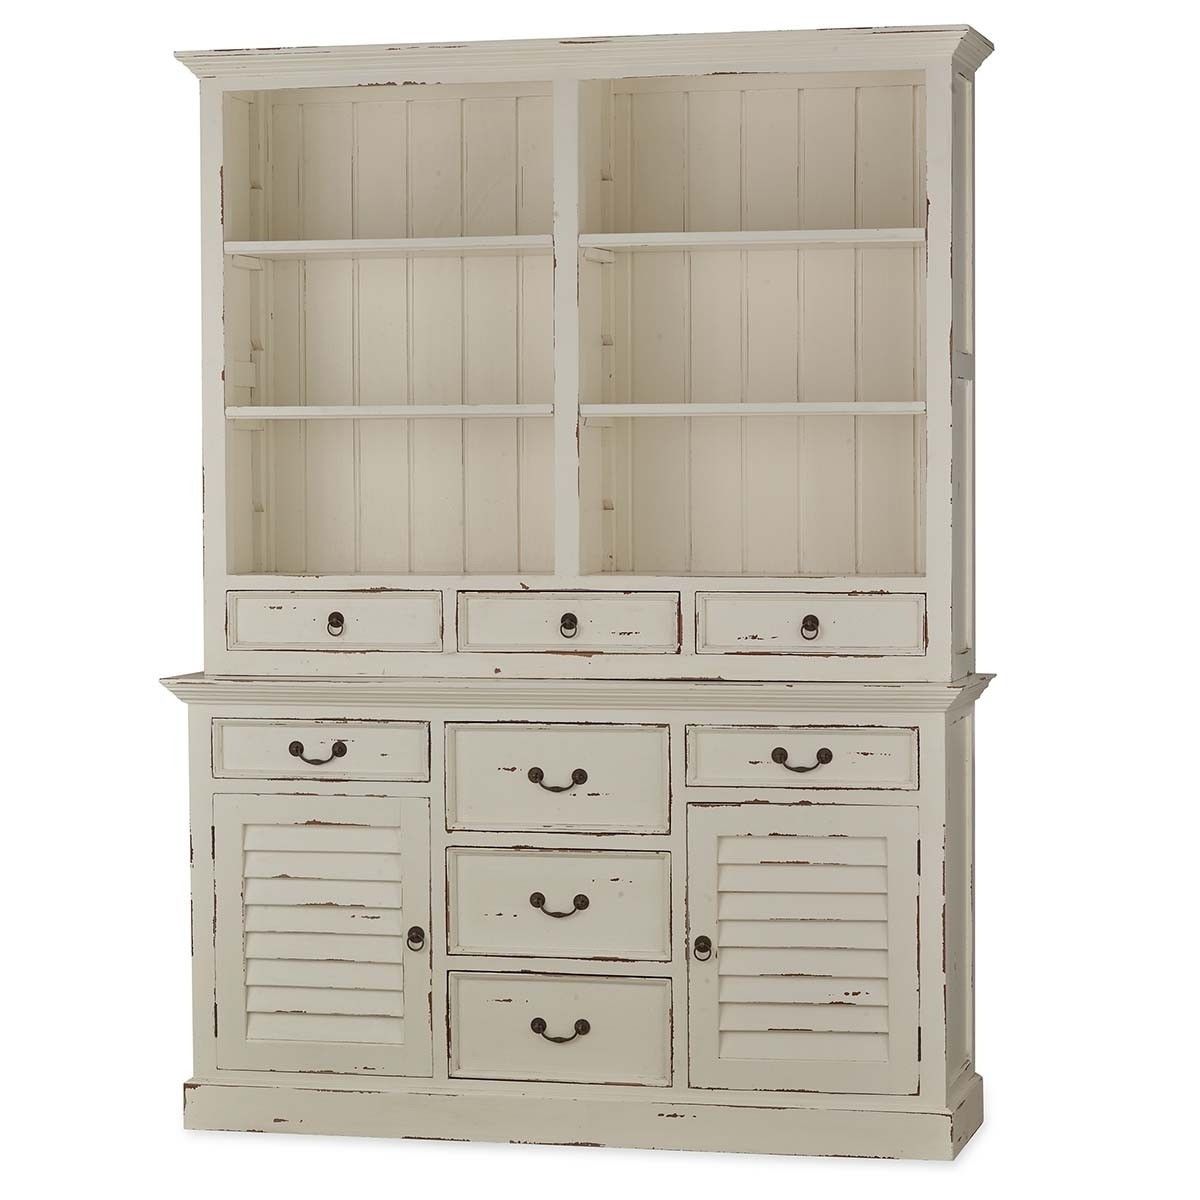 Distressed Cottage Farmhouse Open Kitchen Display Cabinet White - Furniture on Main